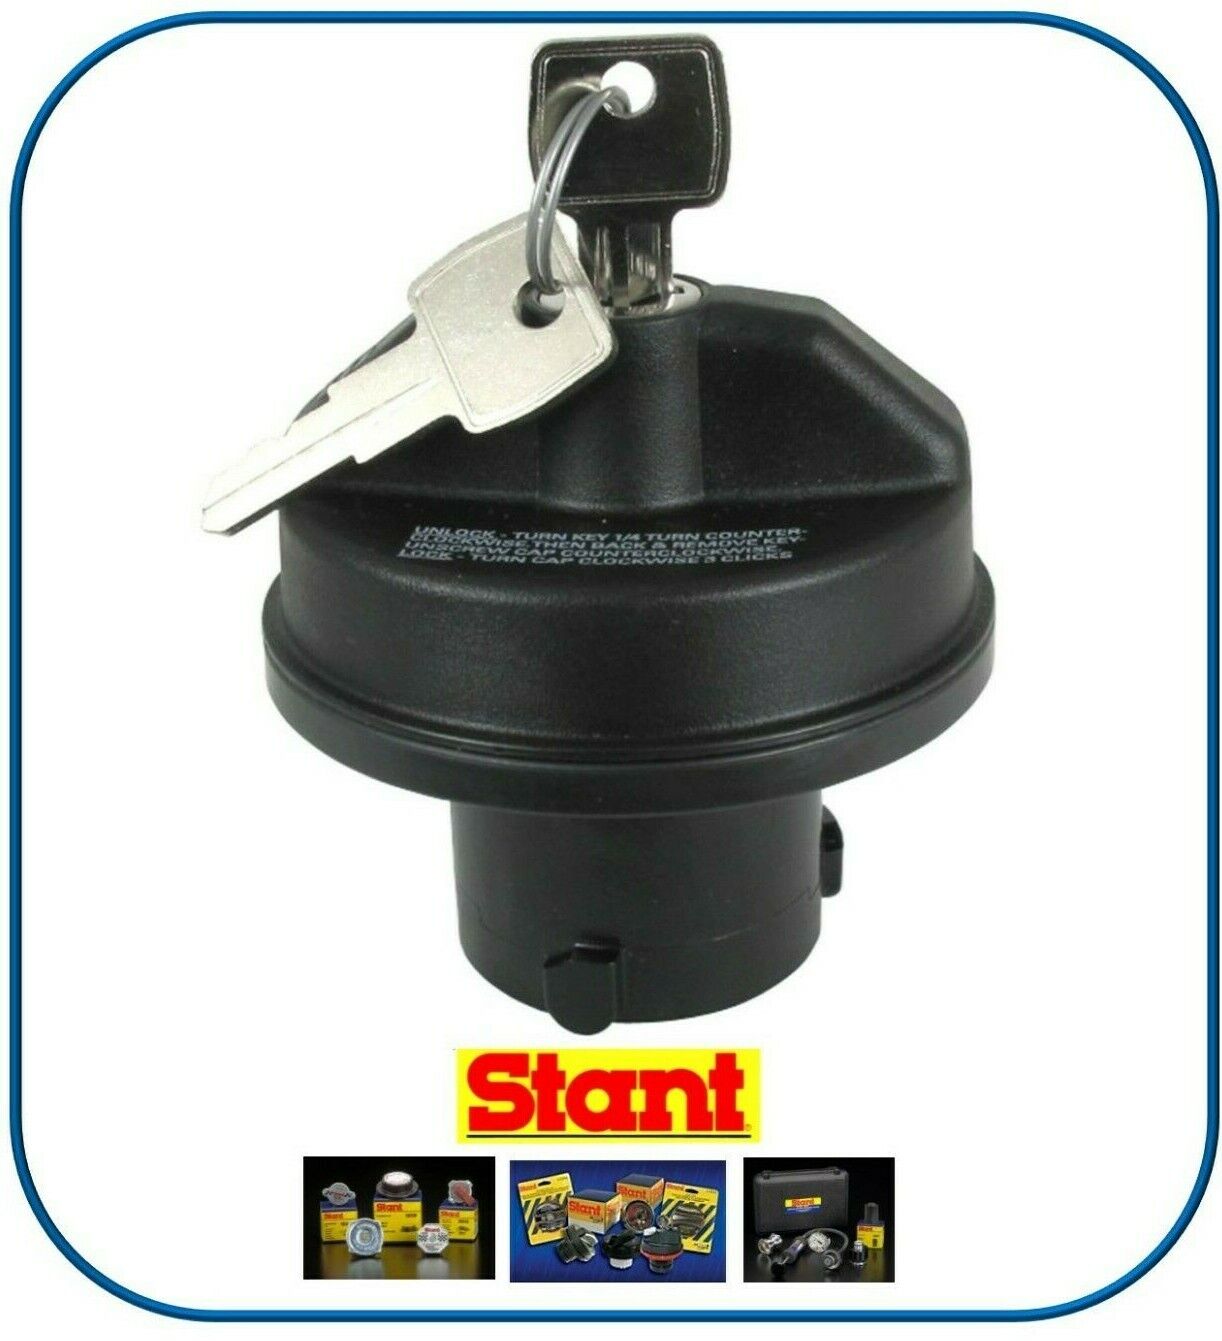  STANT 10502 OEM Locking Fuel / Gas Cap For Fuel Tank OE Replacement Genuine 